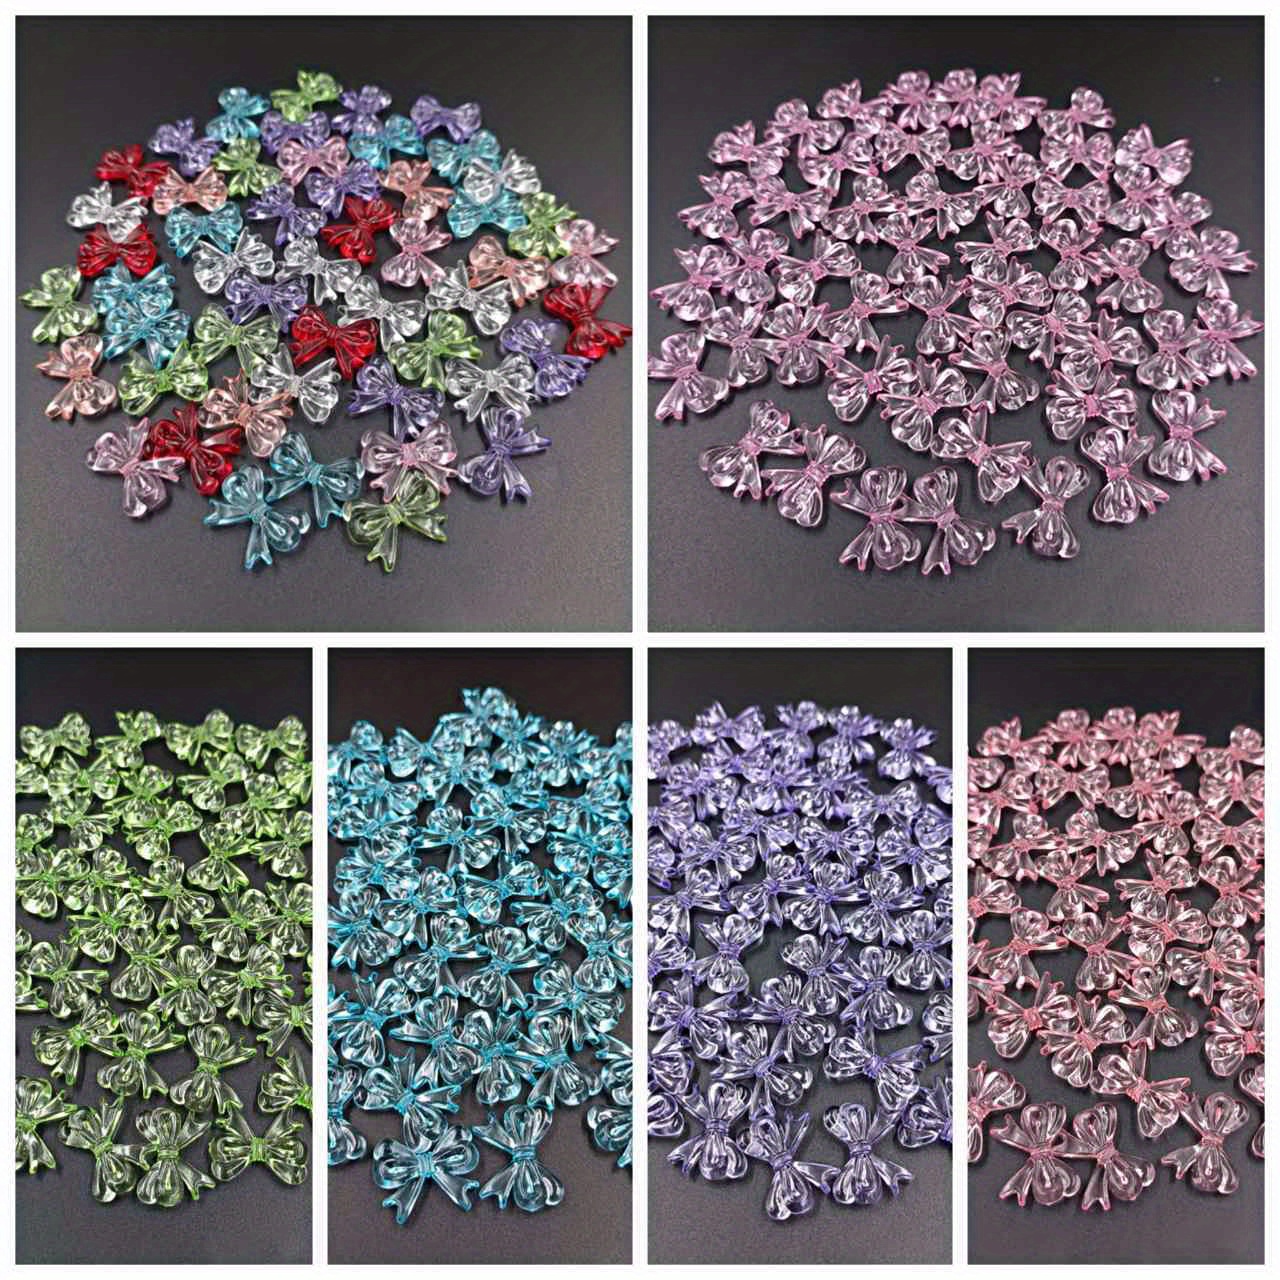 x 24pcs Clear Multicolored Bow beads 30mm x 23mm